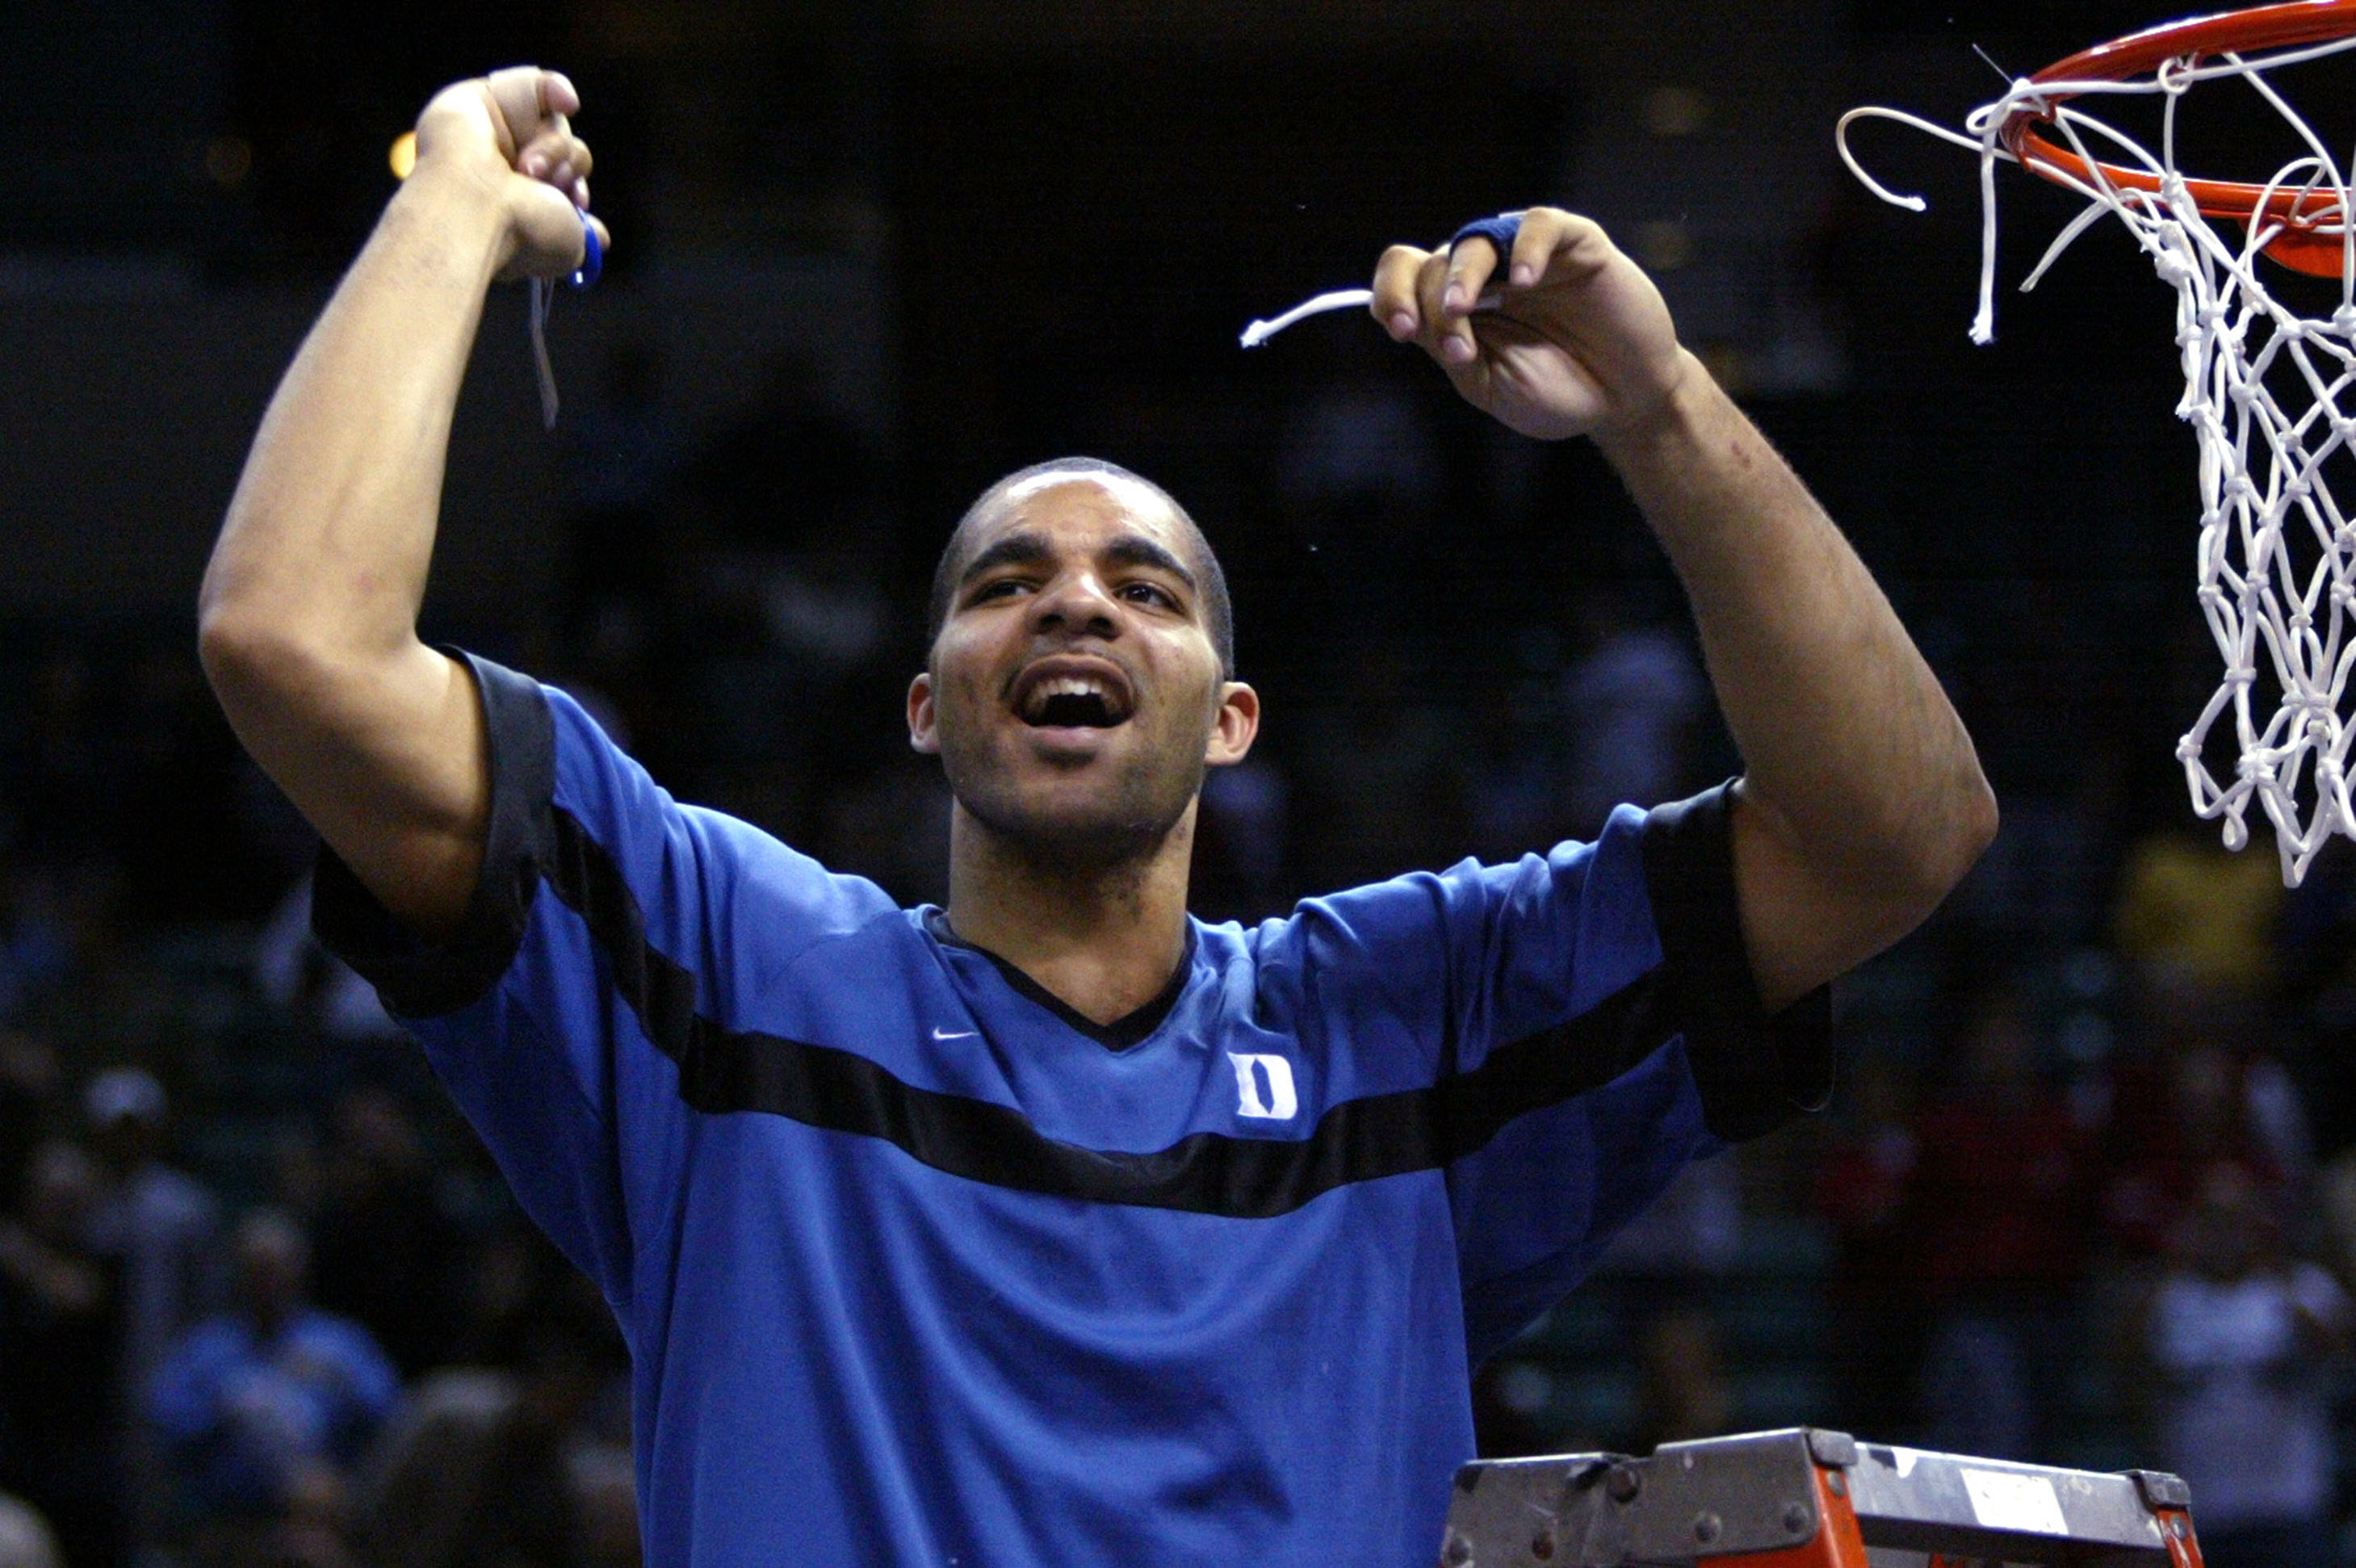 3/10/2002 -- Charlotte, N.C. -- ACC Basketball Tournament Championship Game -- Duke Blue Devils v. North Carolina State Wolfpack -- Duke's ACC Tournament MVP Carlos Boozer gives out a yell after taking his piece of the net after the Blue Devil's 91-61 victory over N.C. State in the ACC Tournament Championship game Sunday. ORG XMIT: ACC HDB360.JPG